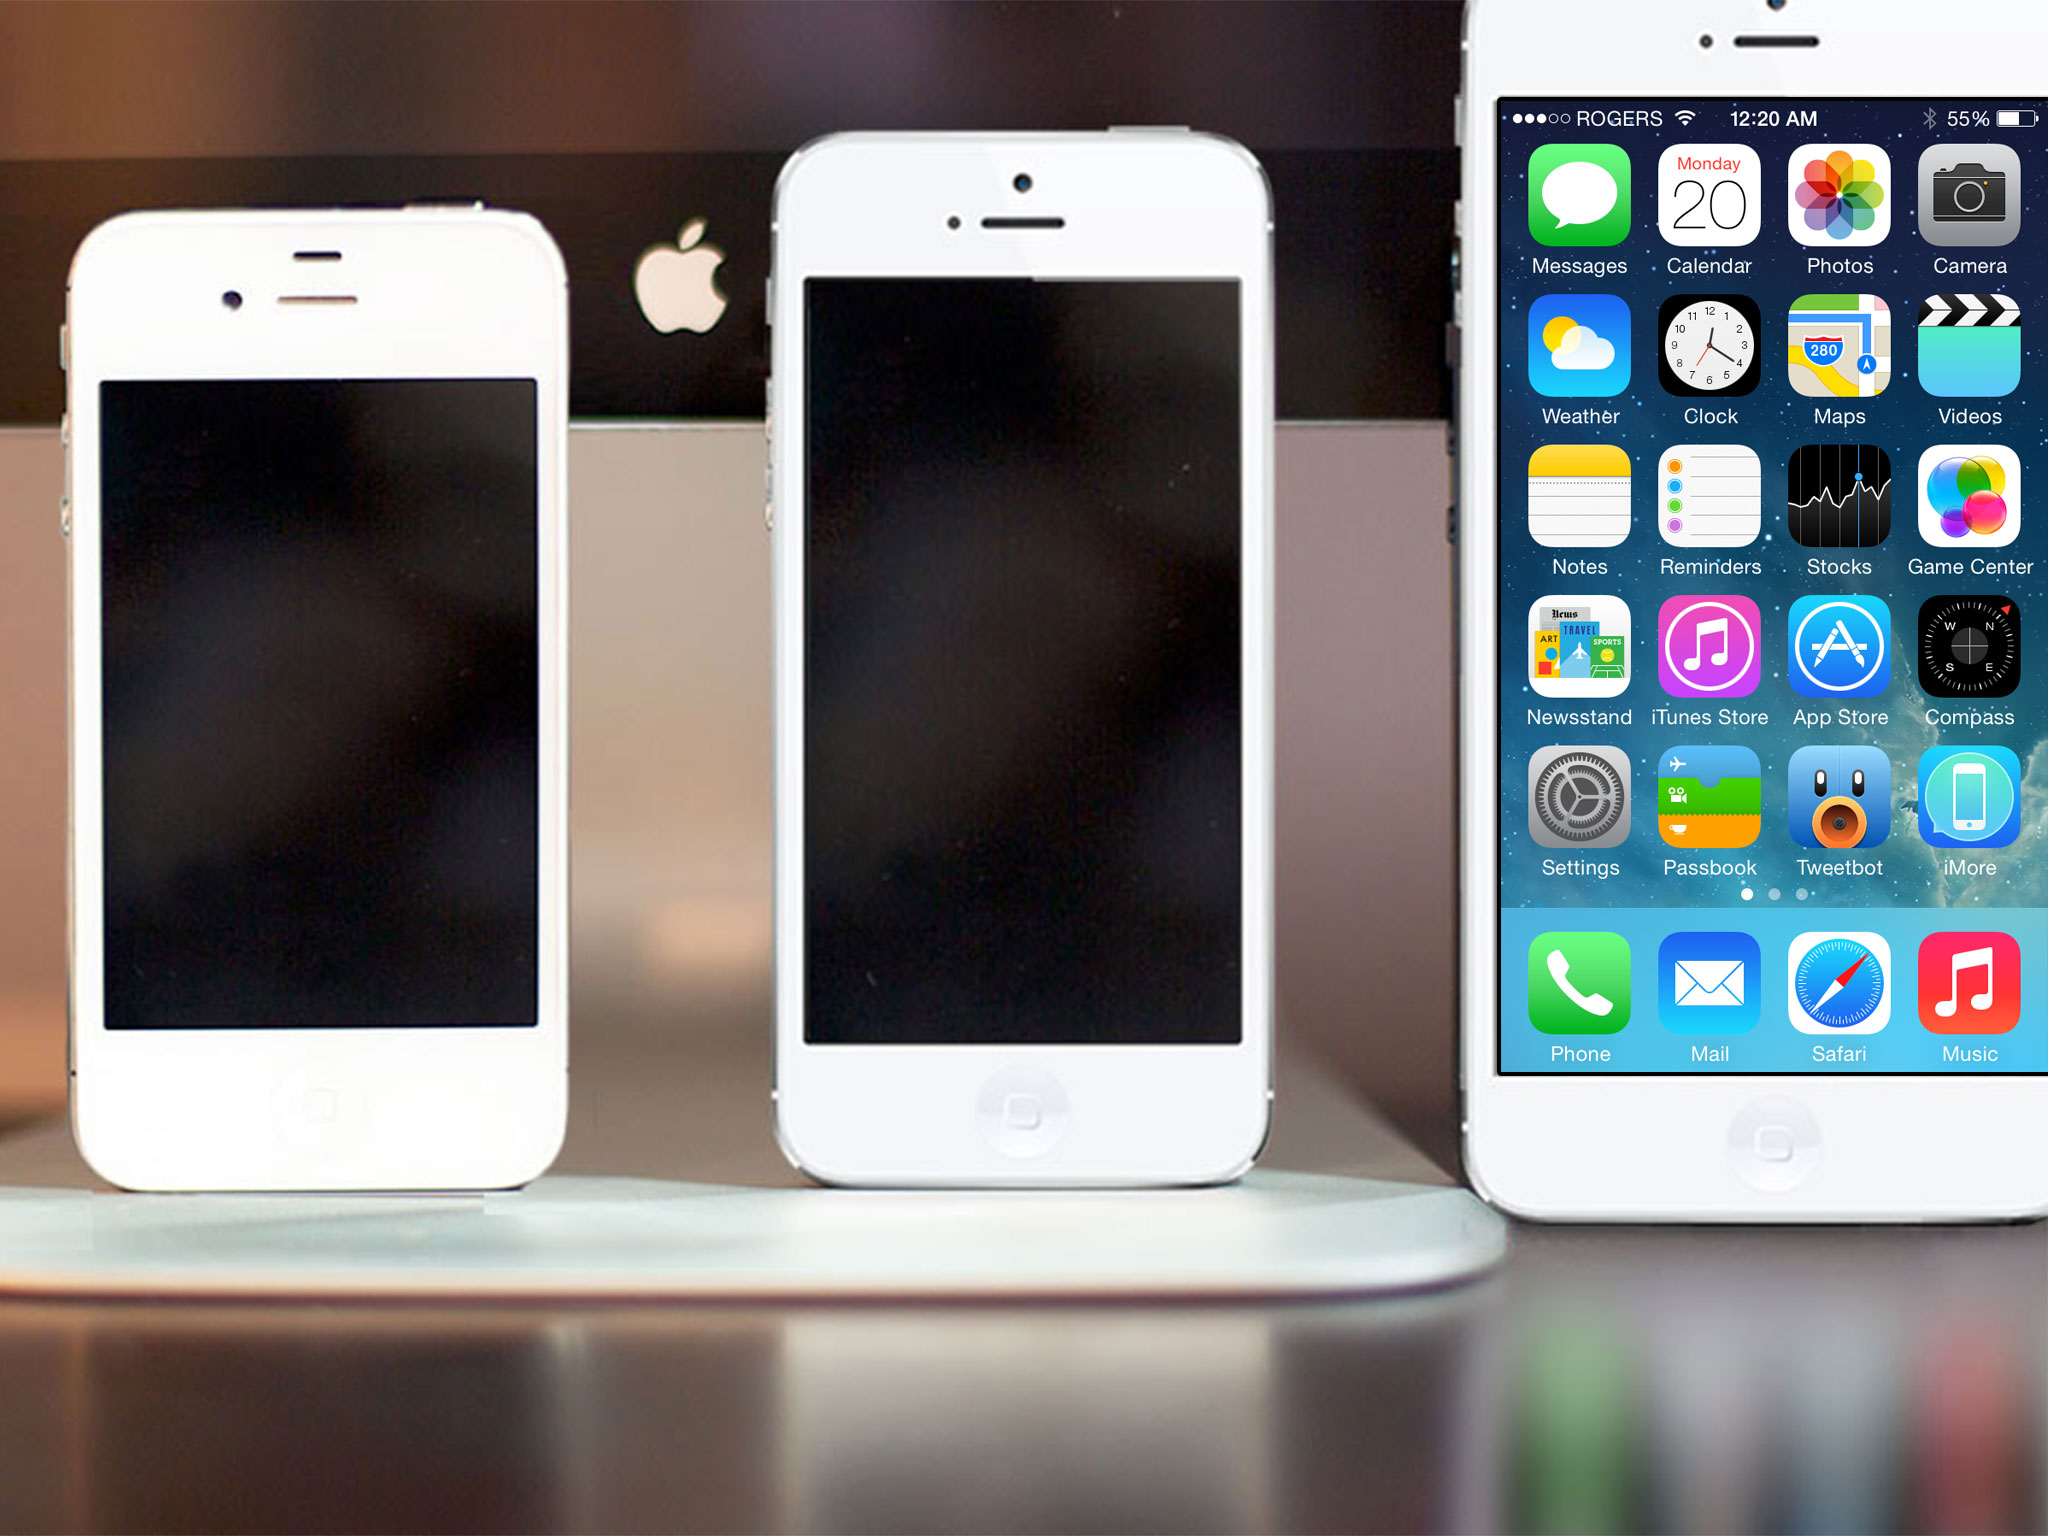 How would you feel if the iPhone 6 didn't have a bigger screen?